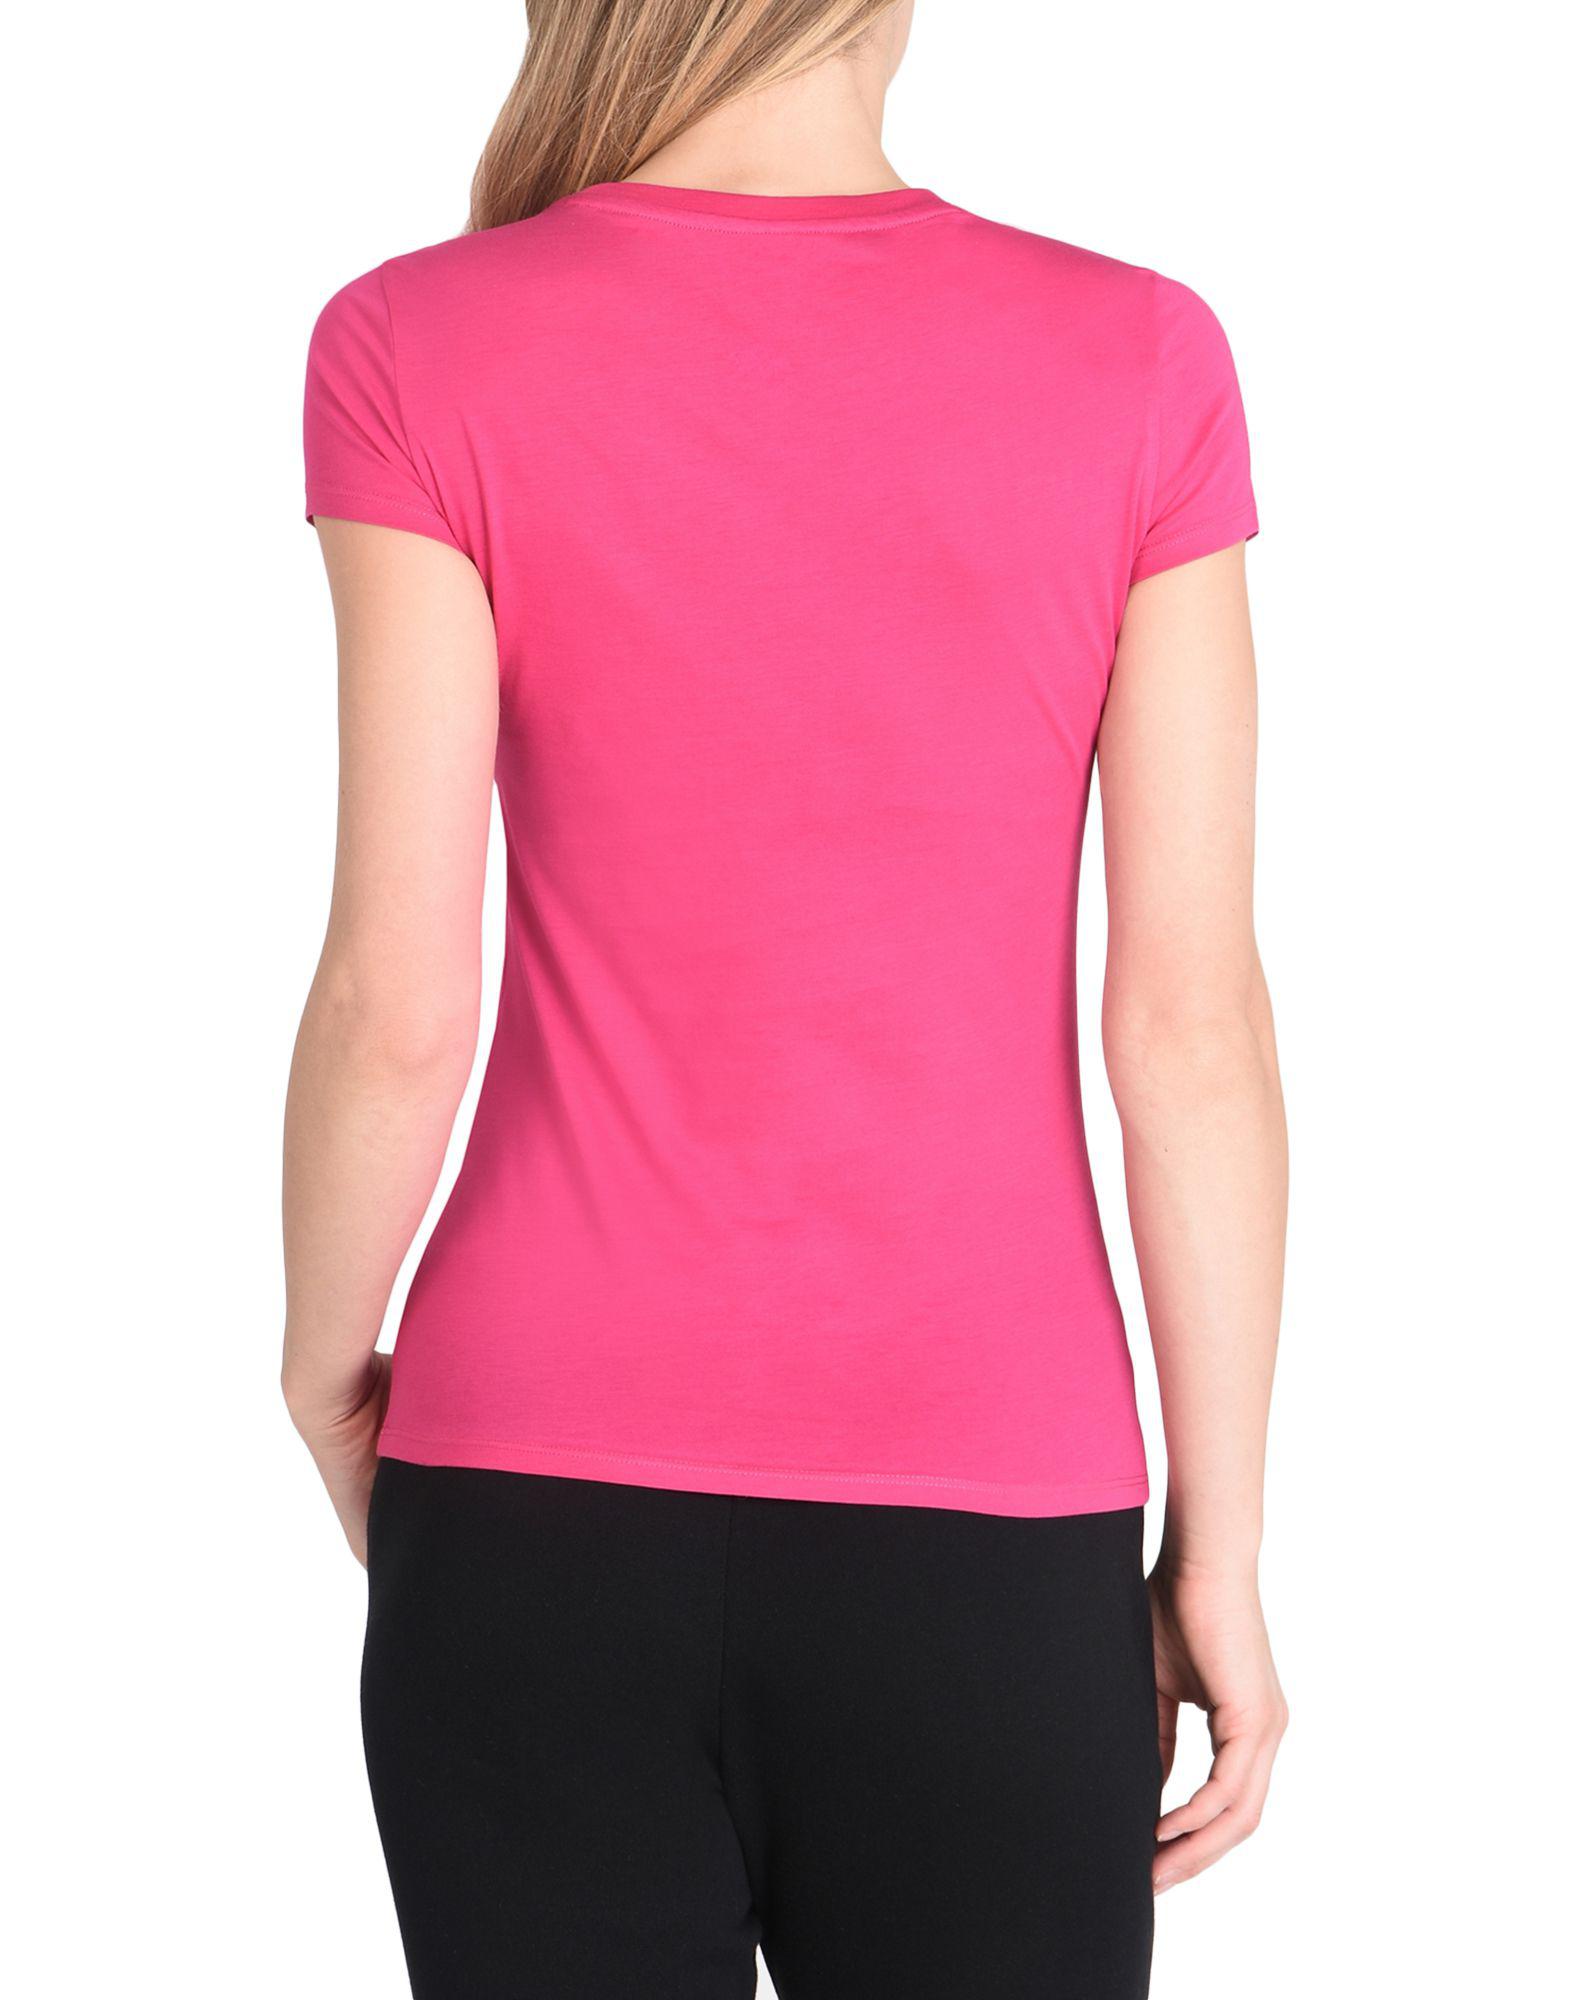 Armani Exchange T-shirt in Pink - Lyst